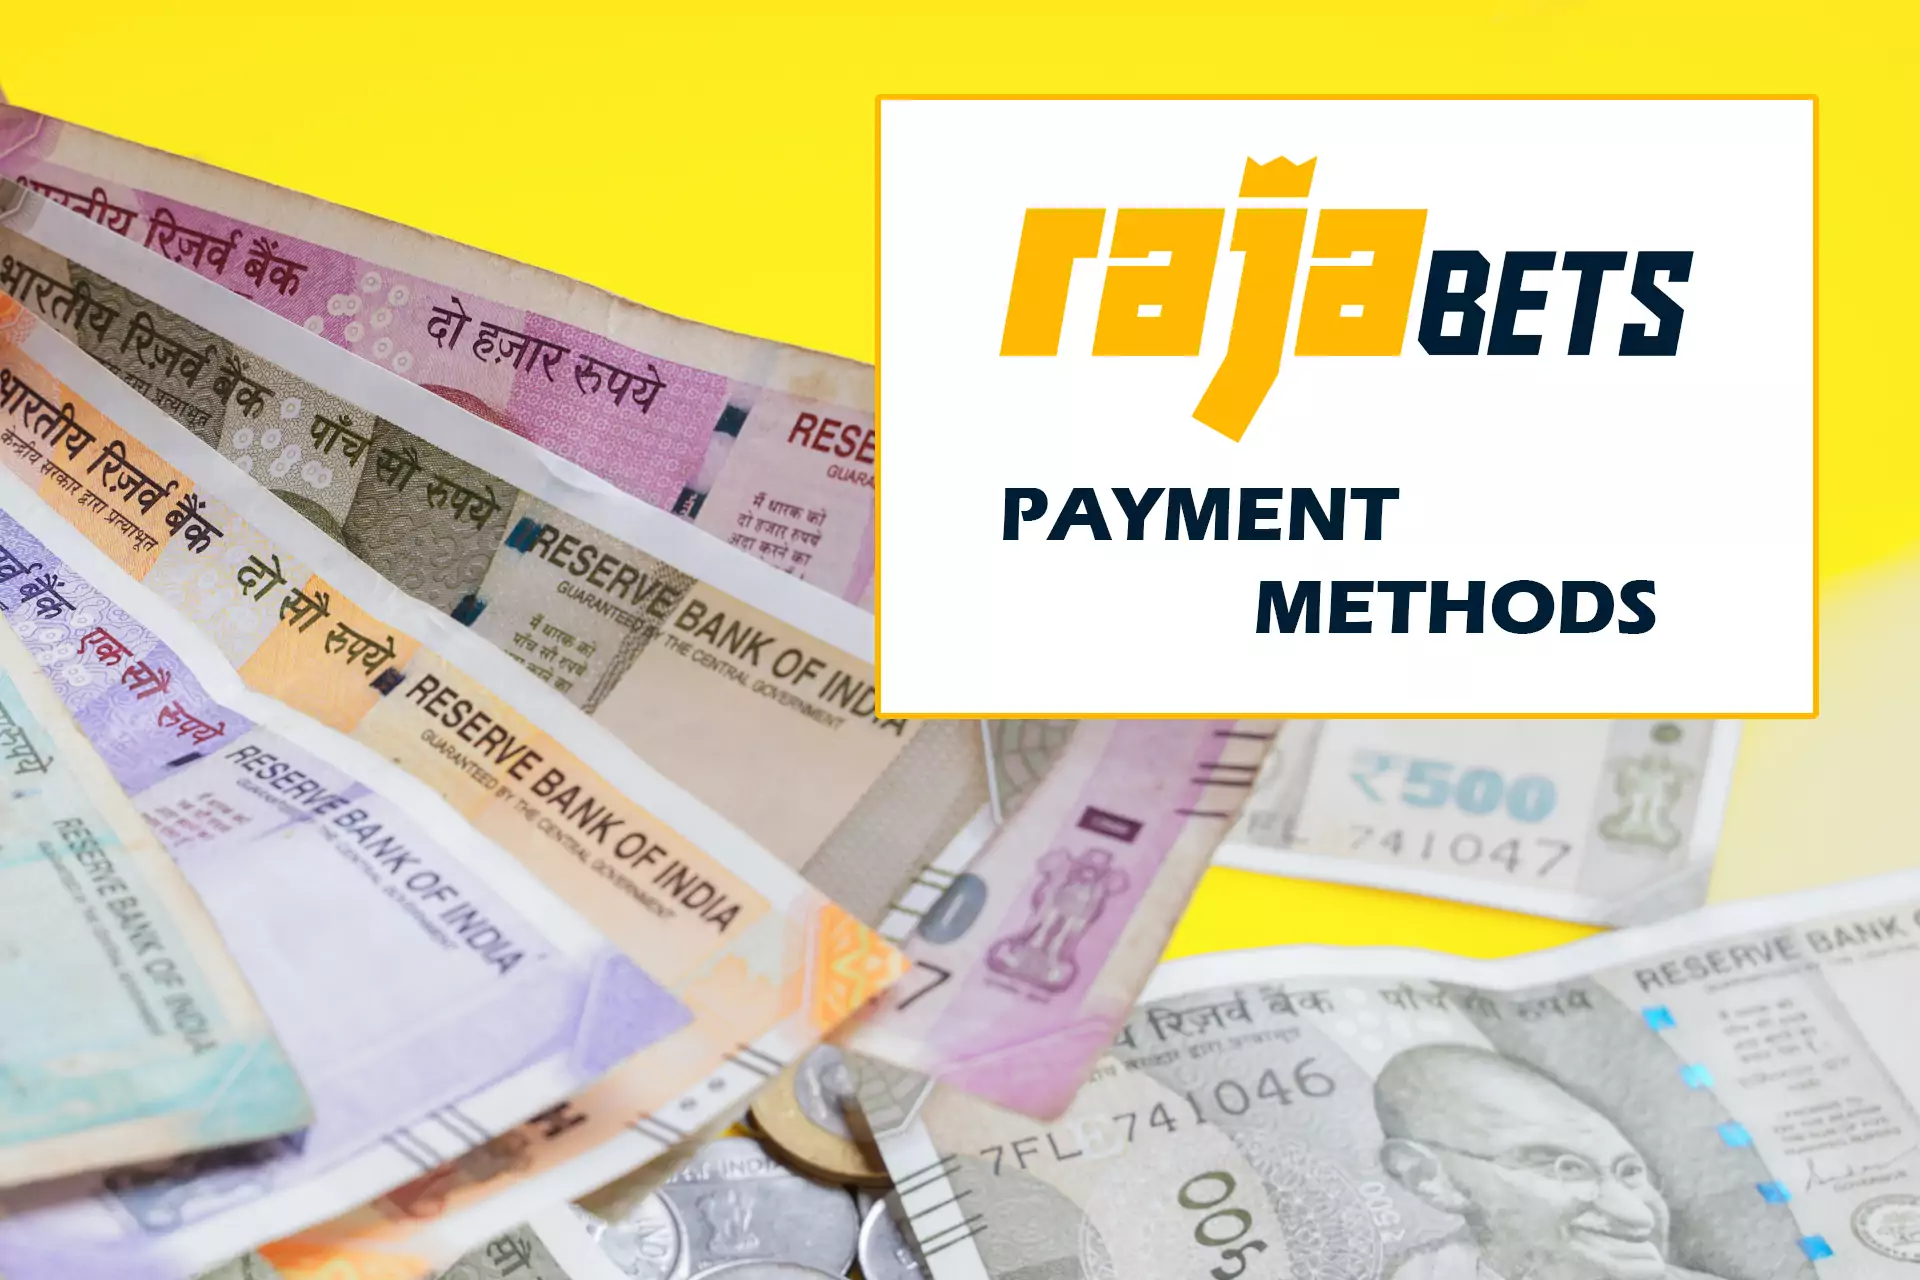 Rajabets accepts transfers from the vast majority of payment systems working in India.